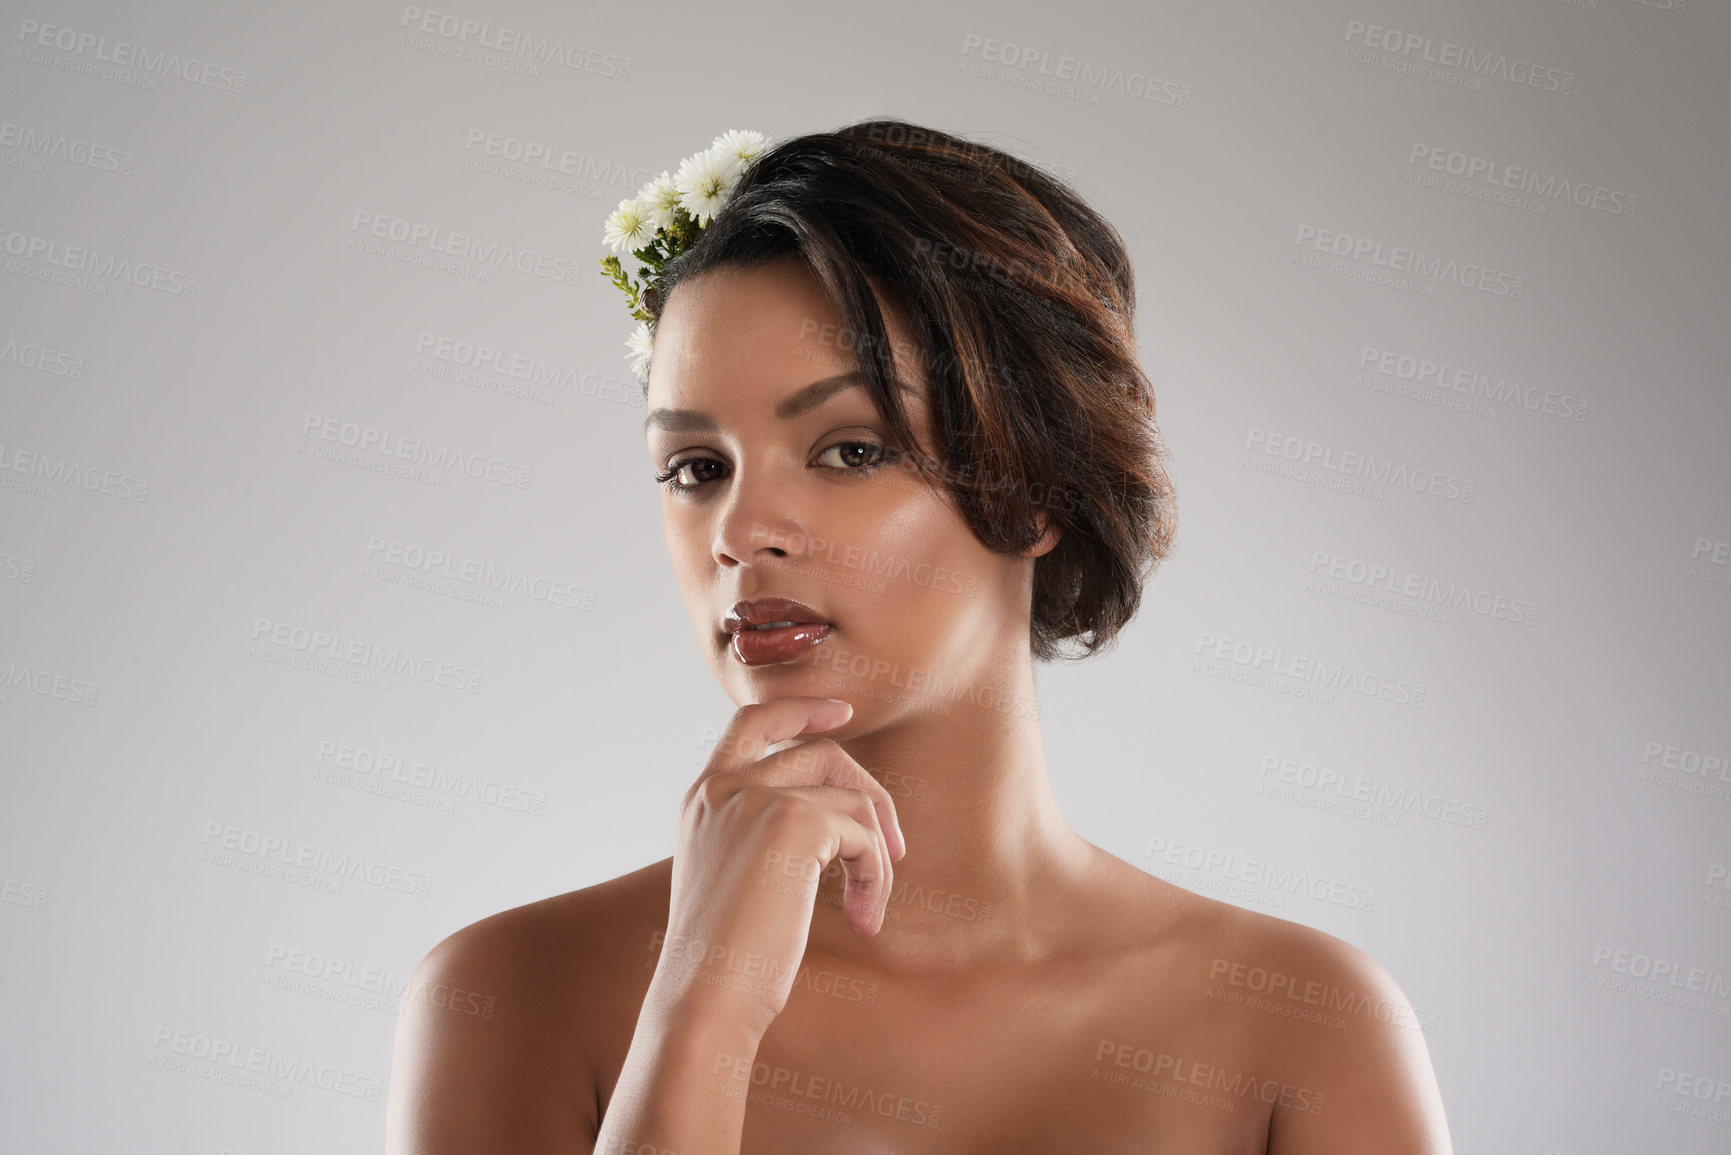 Buy stock photo Studio portrait of a beautiful young woman with flowers in her hair posing against a gray background